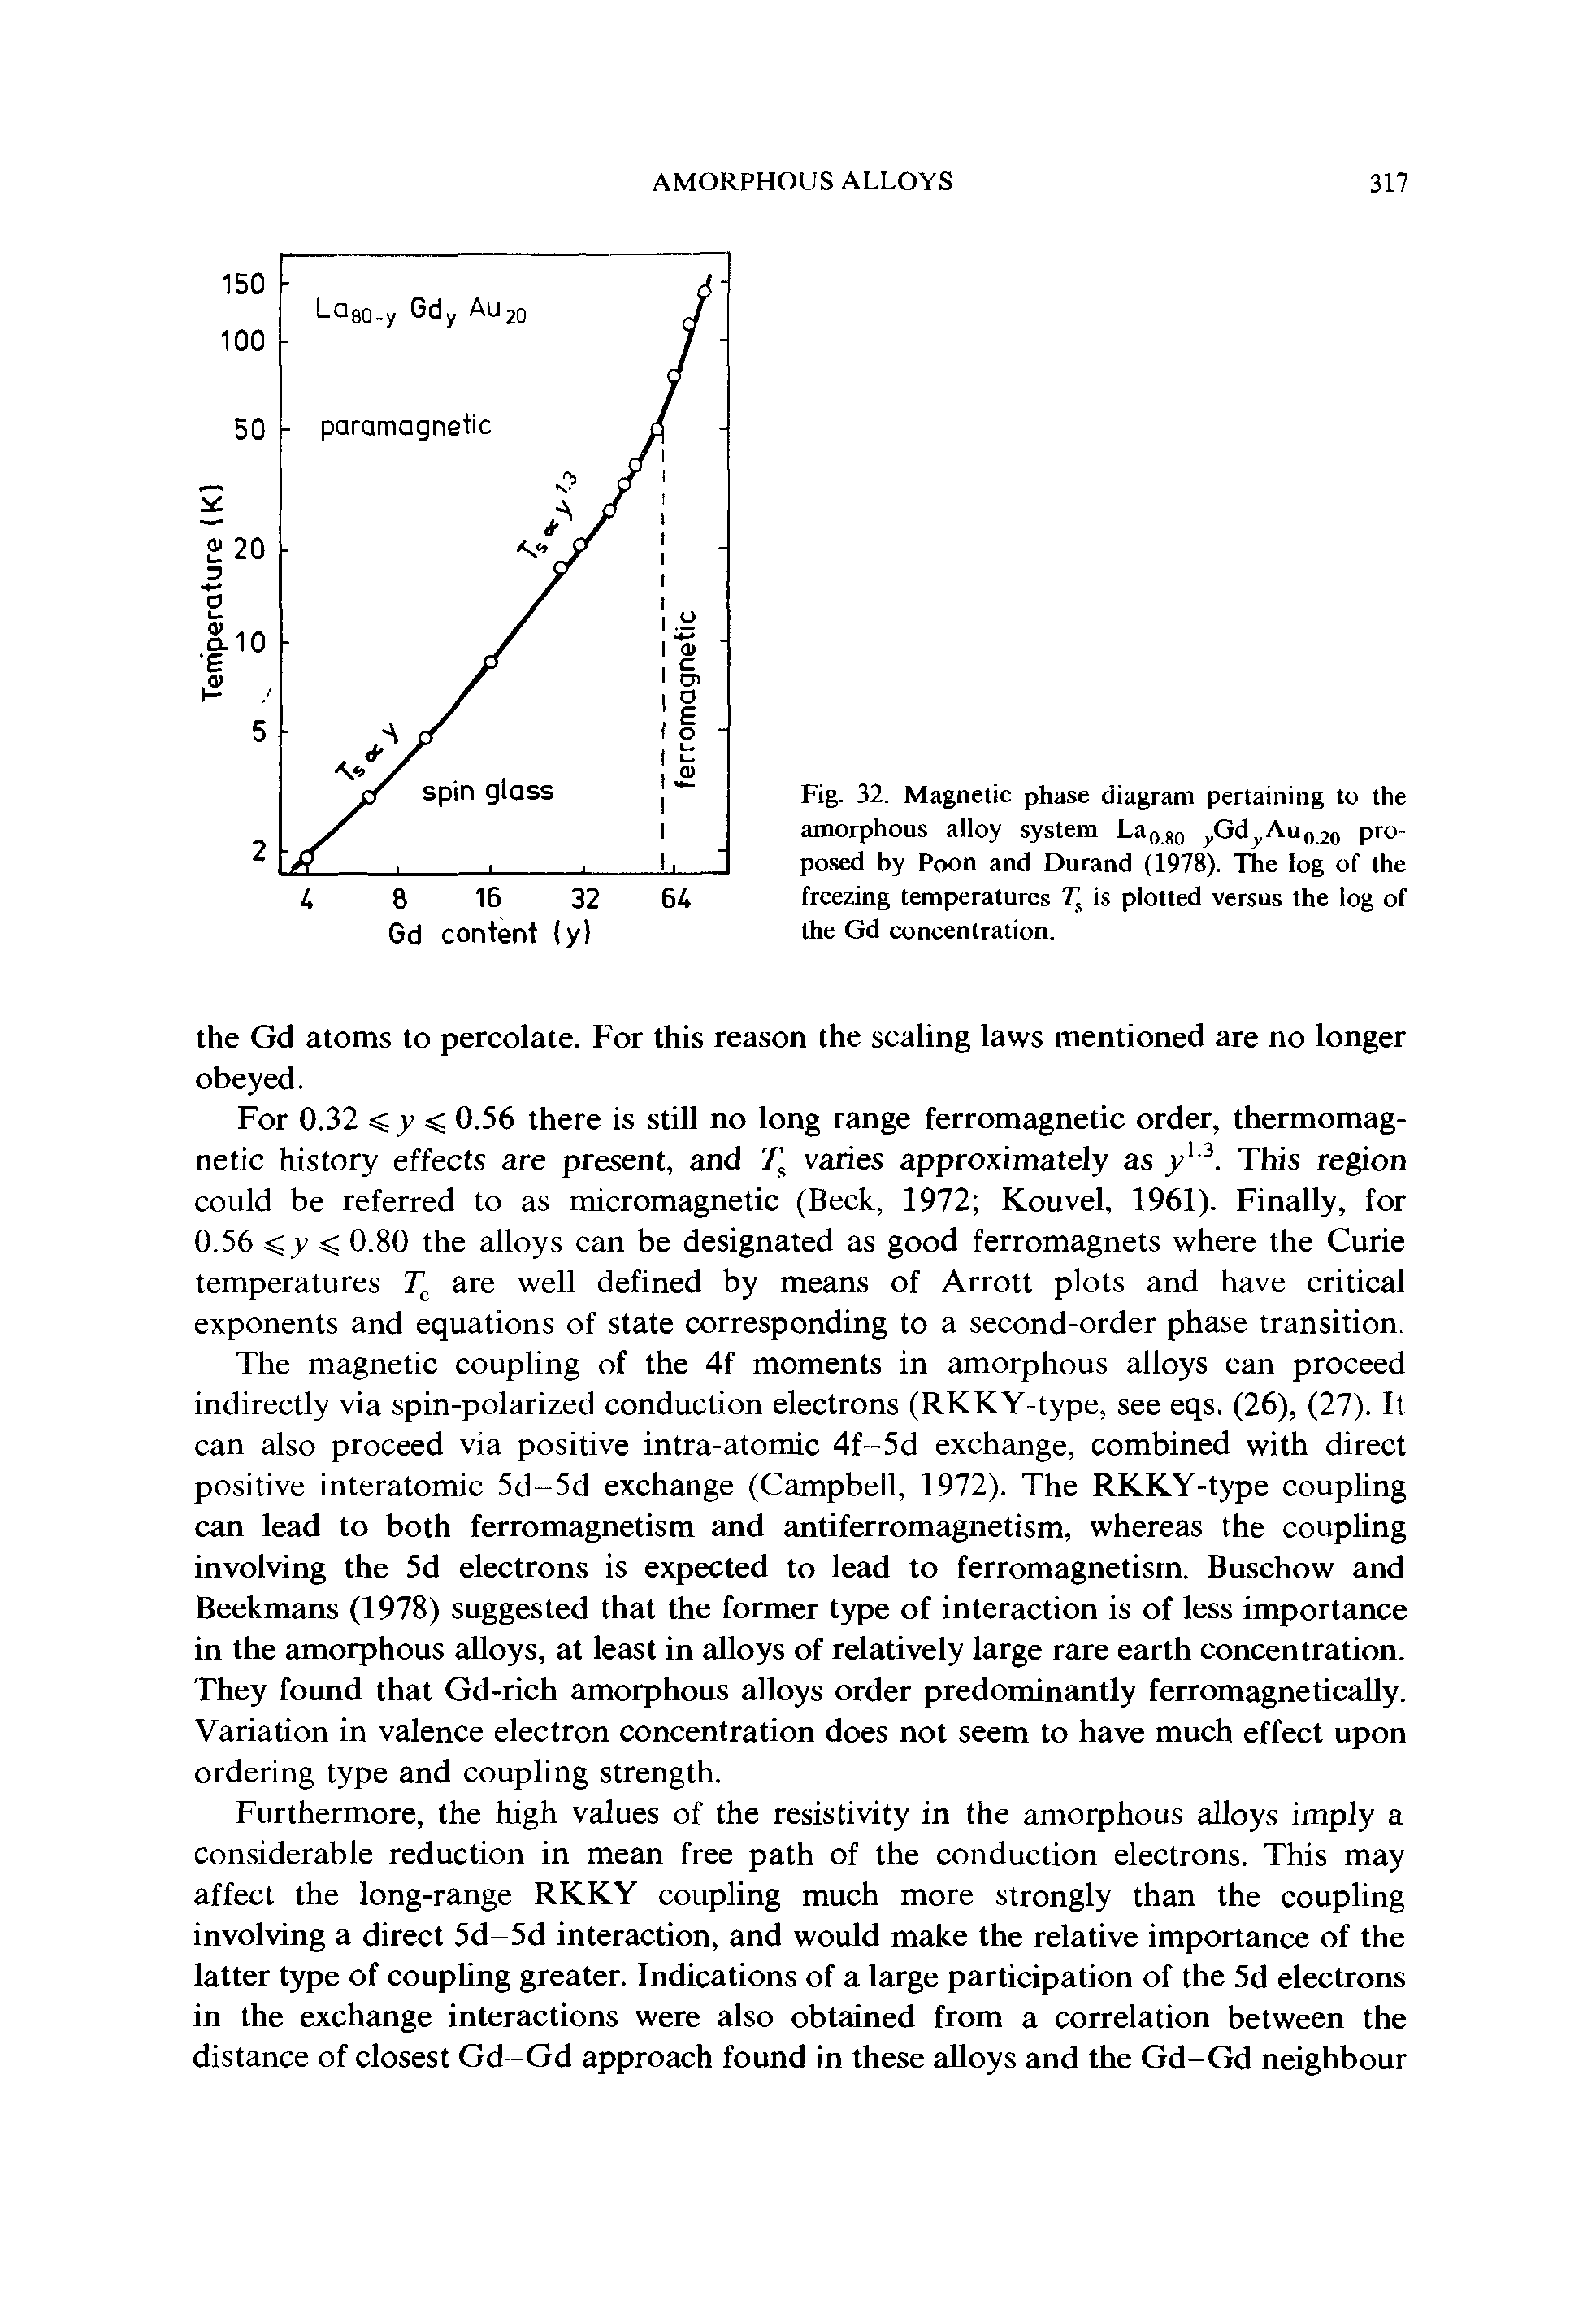 Fig. 32. Magnetic phase diagram pertaining to the amorphous alloy system Laoi,(, Gd Au 2o Proposed by Poon and Durand (1978). The log of the freezing temperatures TJ is plotted versus the log of the Gd concentration.